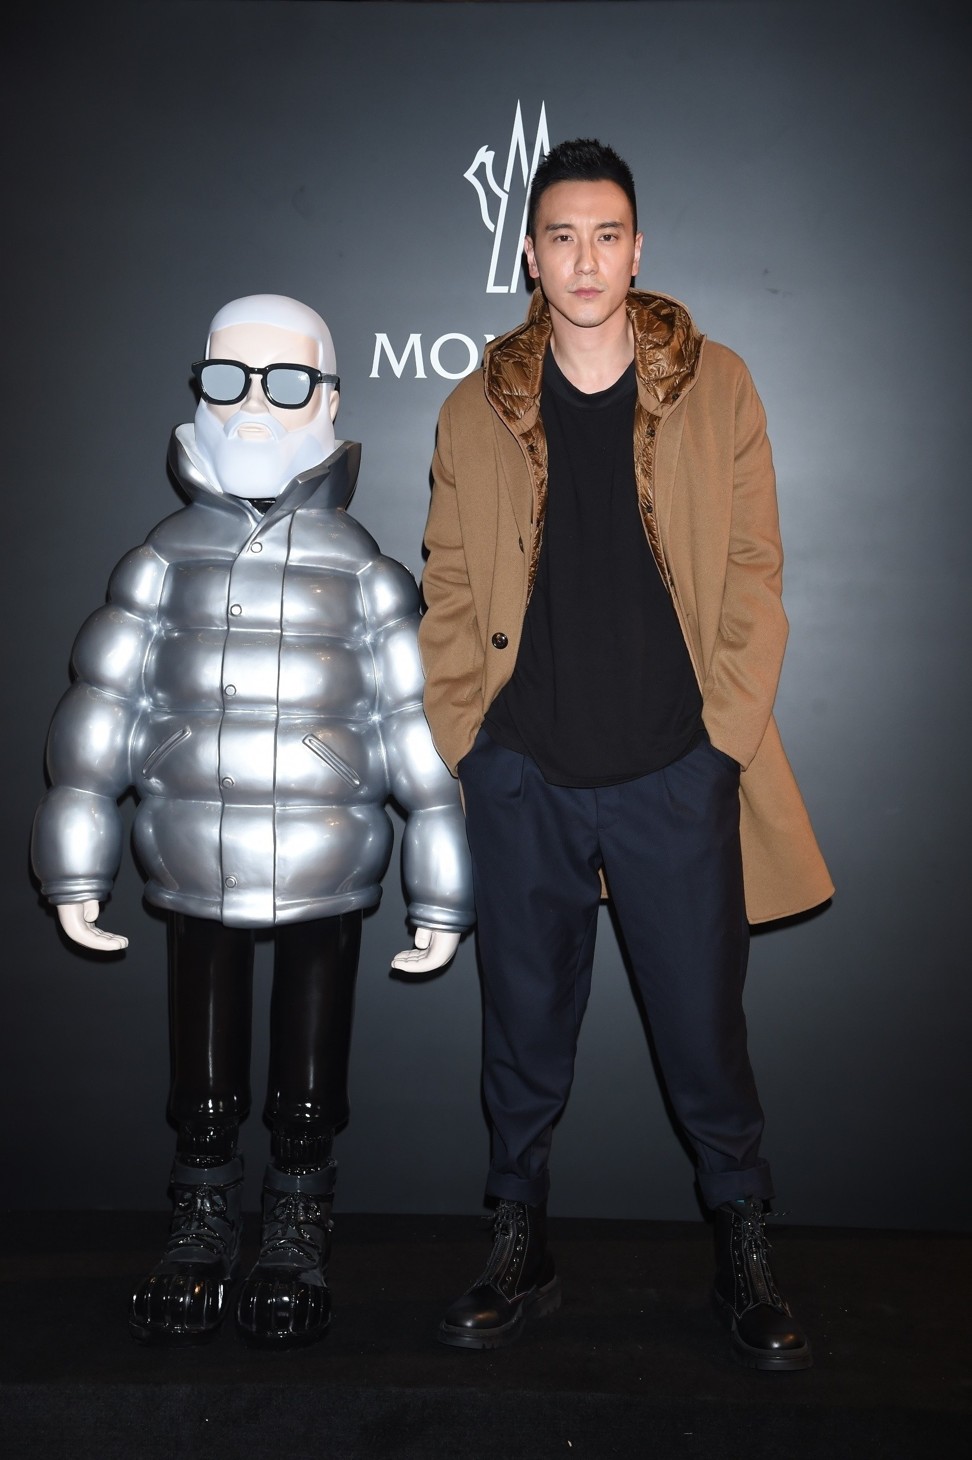 American-Taiwanese actor Sunny Wang at the opening of the new Moncler store.